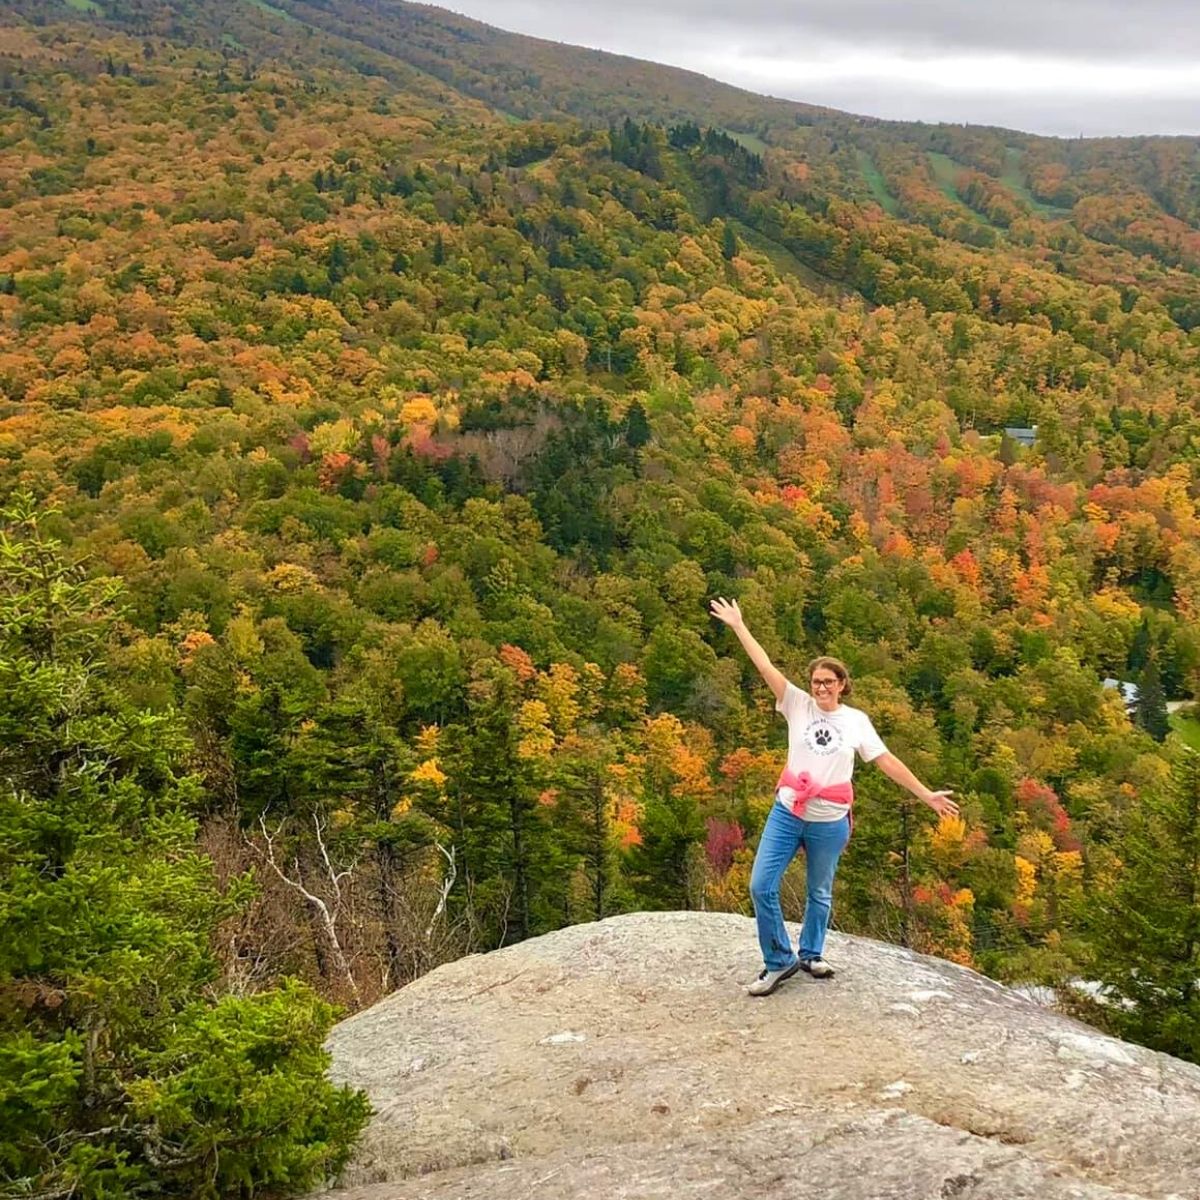 Women on a rock on a mountain with her arms stretched out, fall foliage int he background